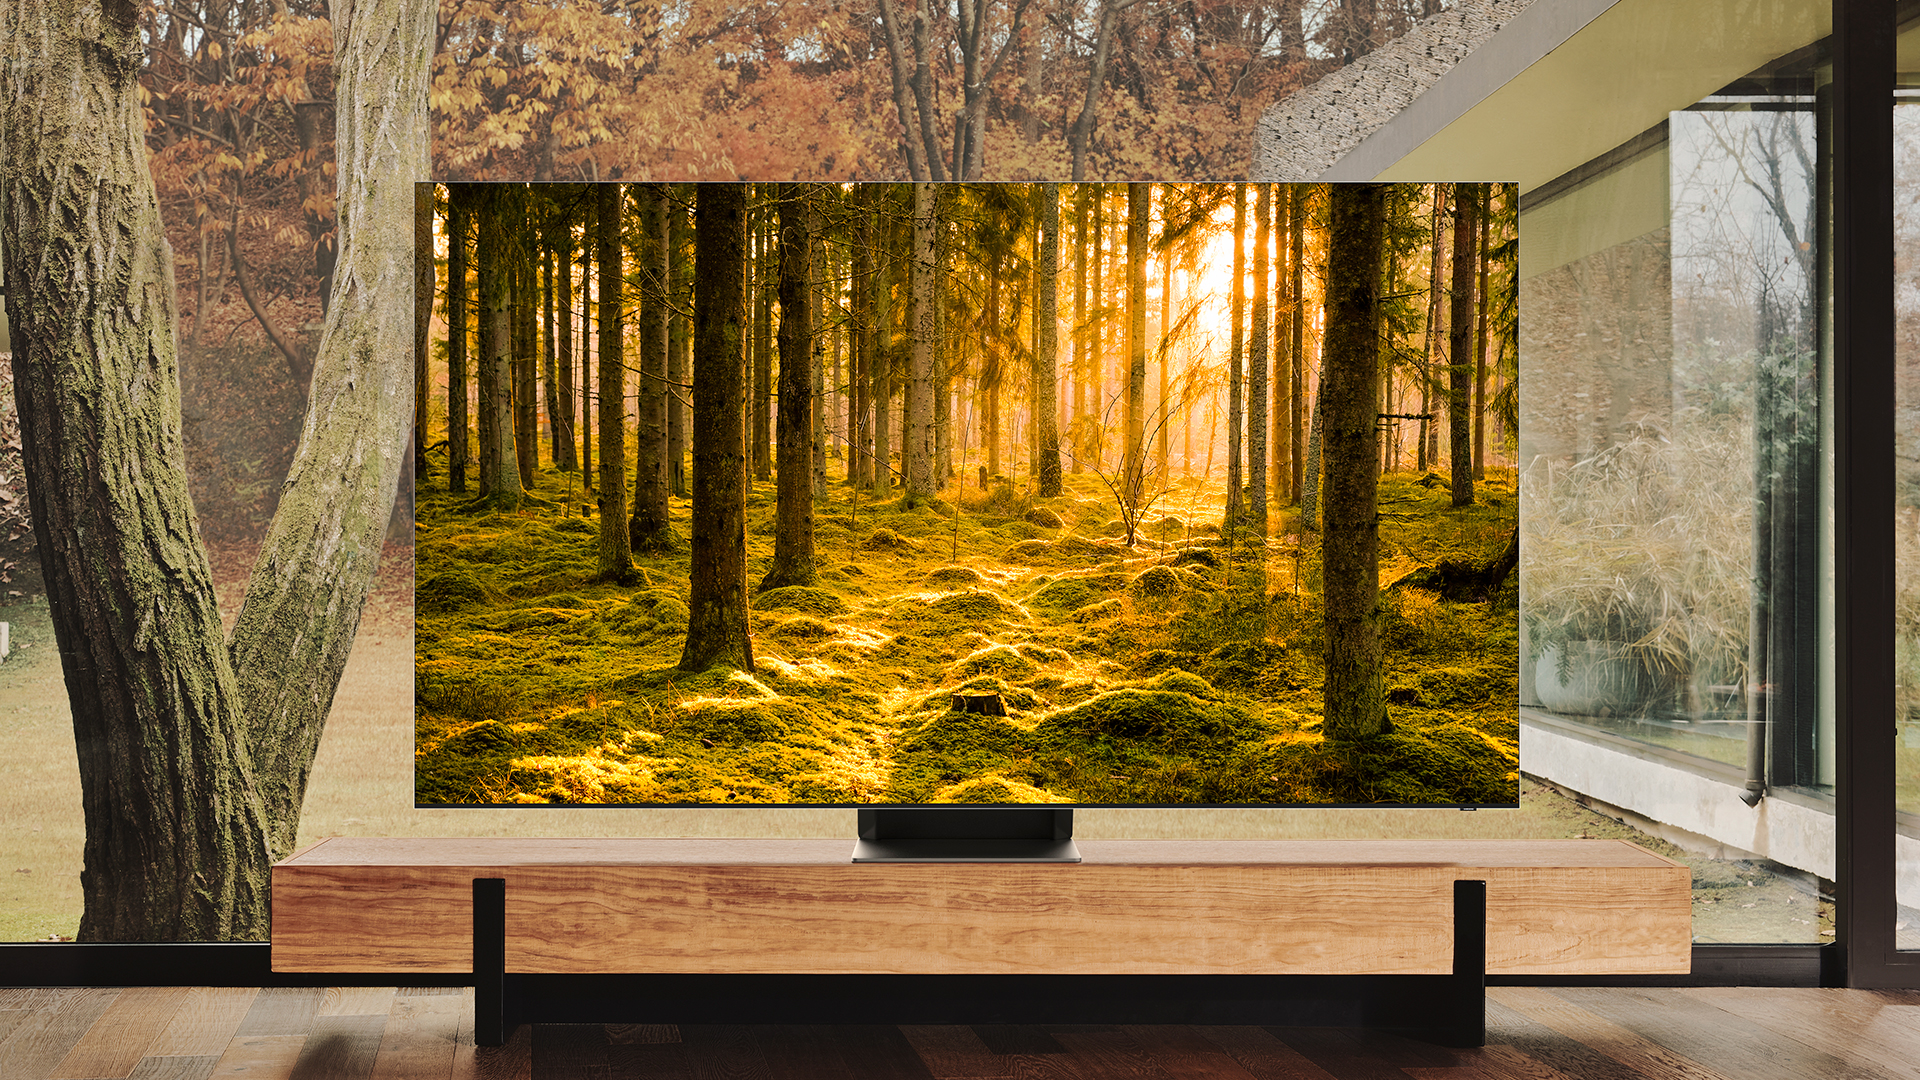 The Samsung QN900B Neo QLED 8K TV displaying a forest scene